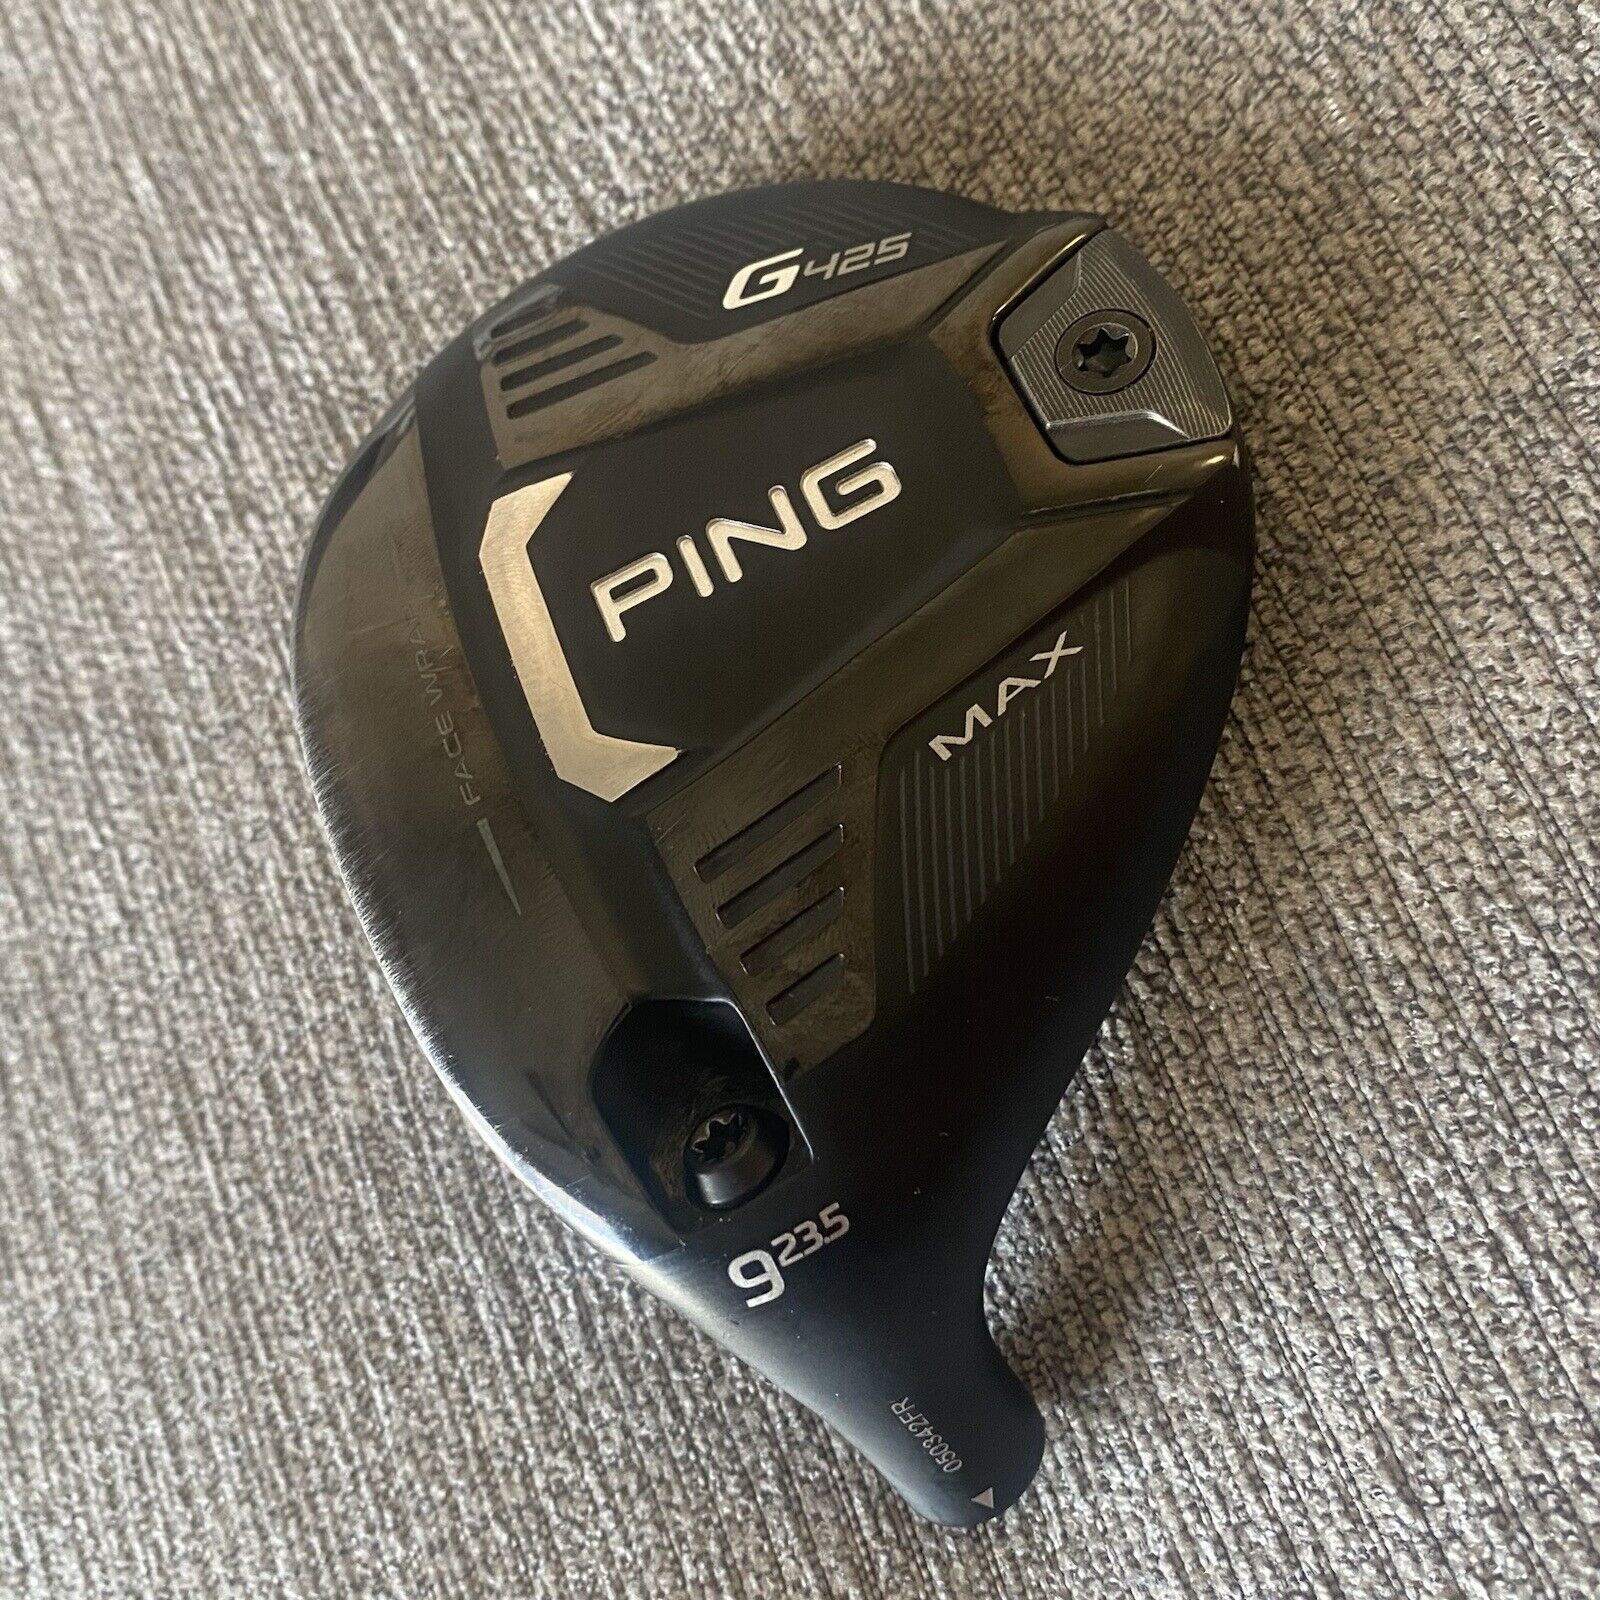 Ping G425 Max 9 Wood 9W 23.5* Left Hand W/ 3 Extra Shafts & Head Cover Included